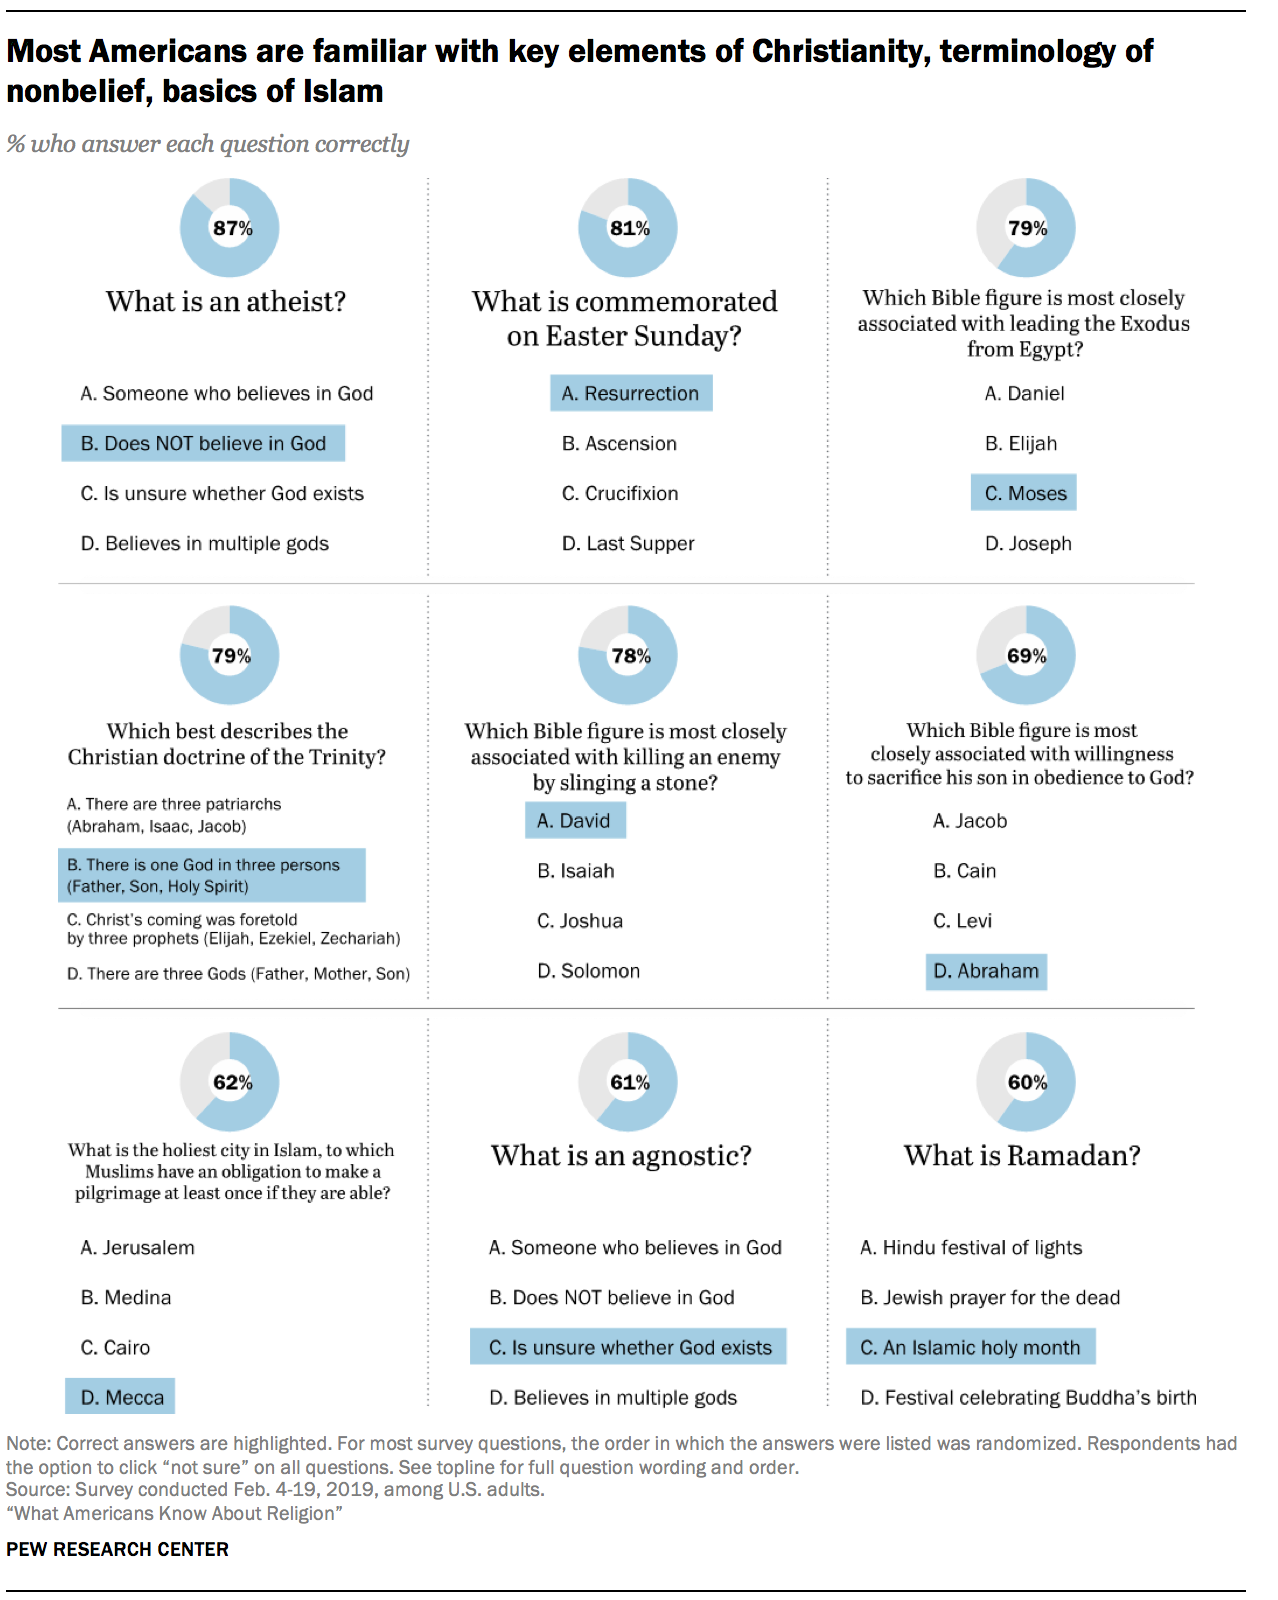 Most Americans are familiar with key elements of Christianity, terminology of nonbelief, basics of Islam